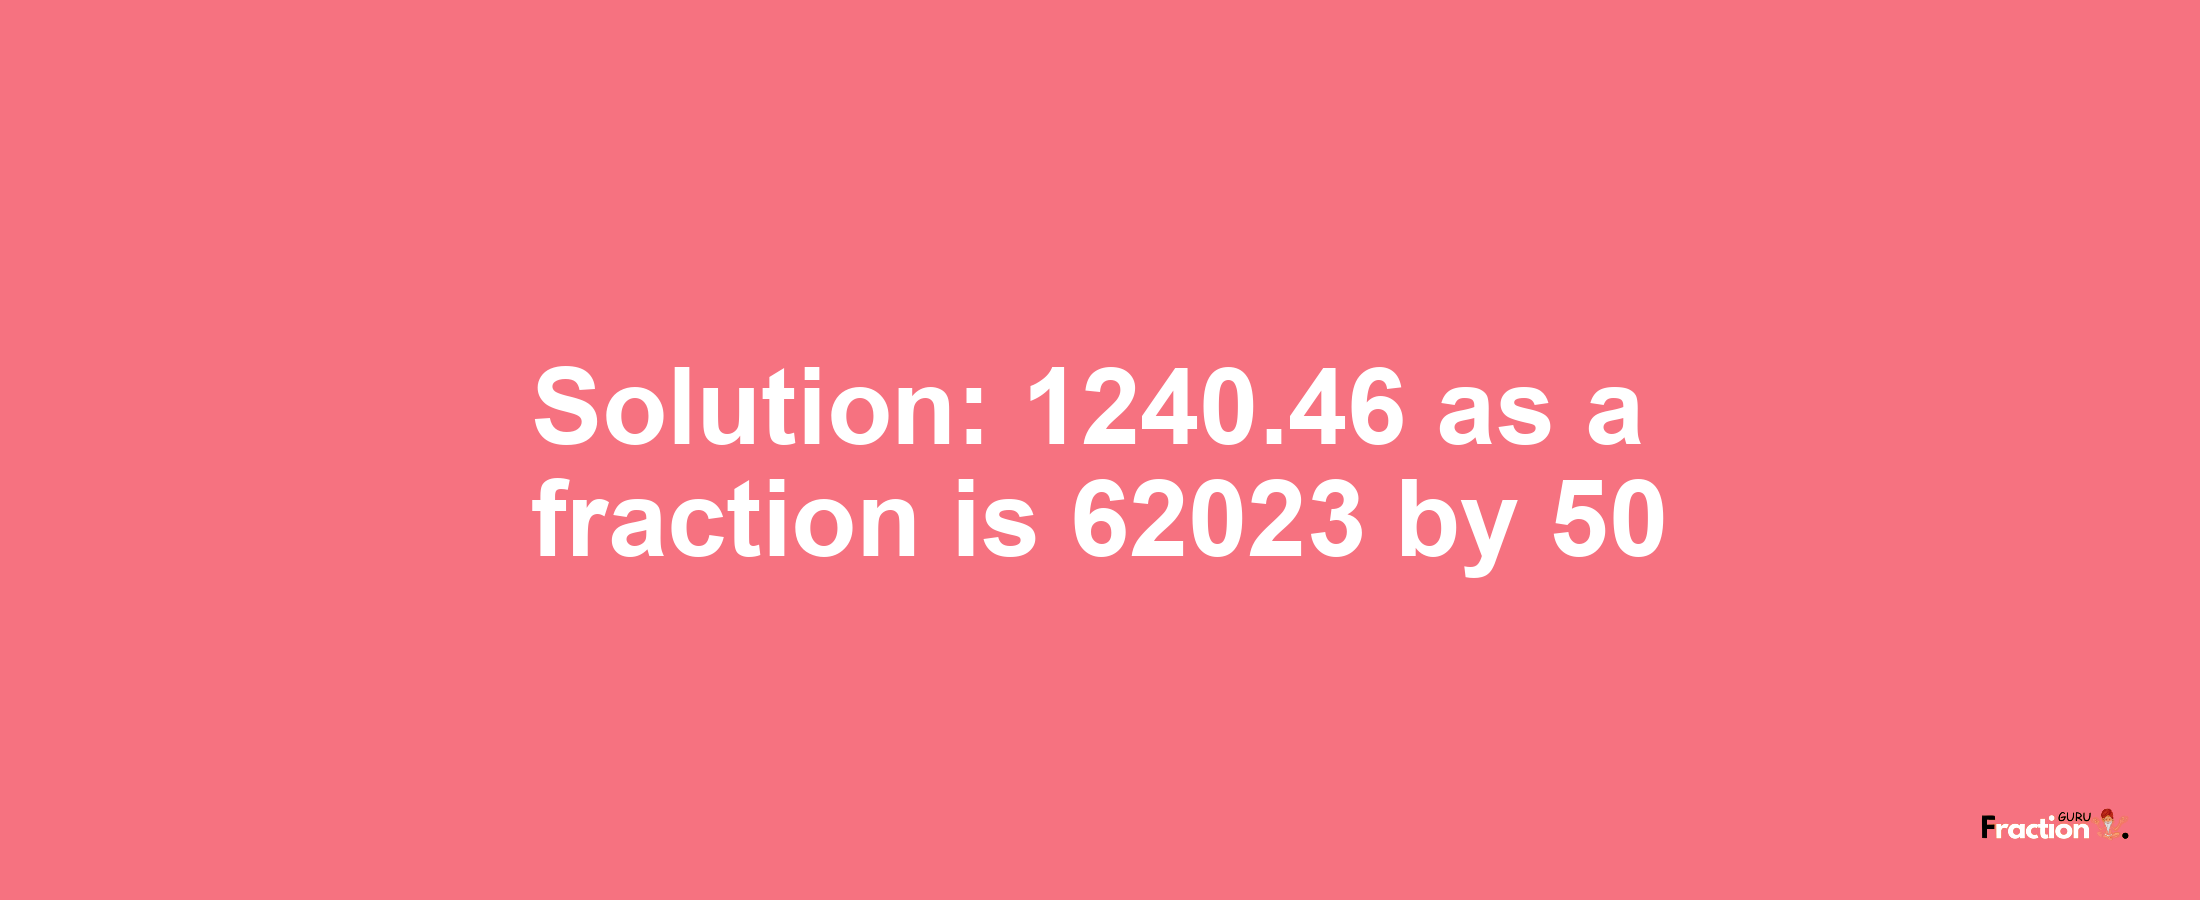 Solution:1240.46 as a fraction is 62023/50